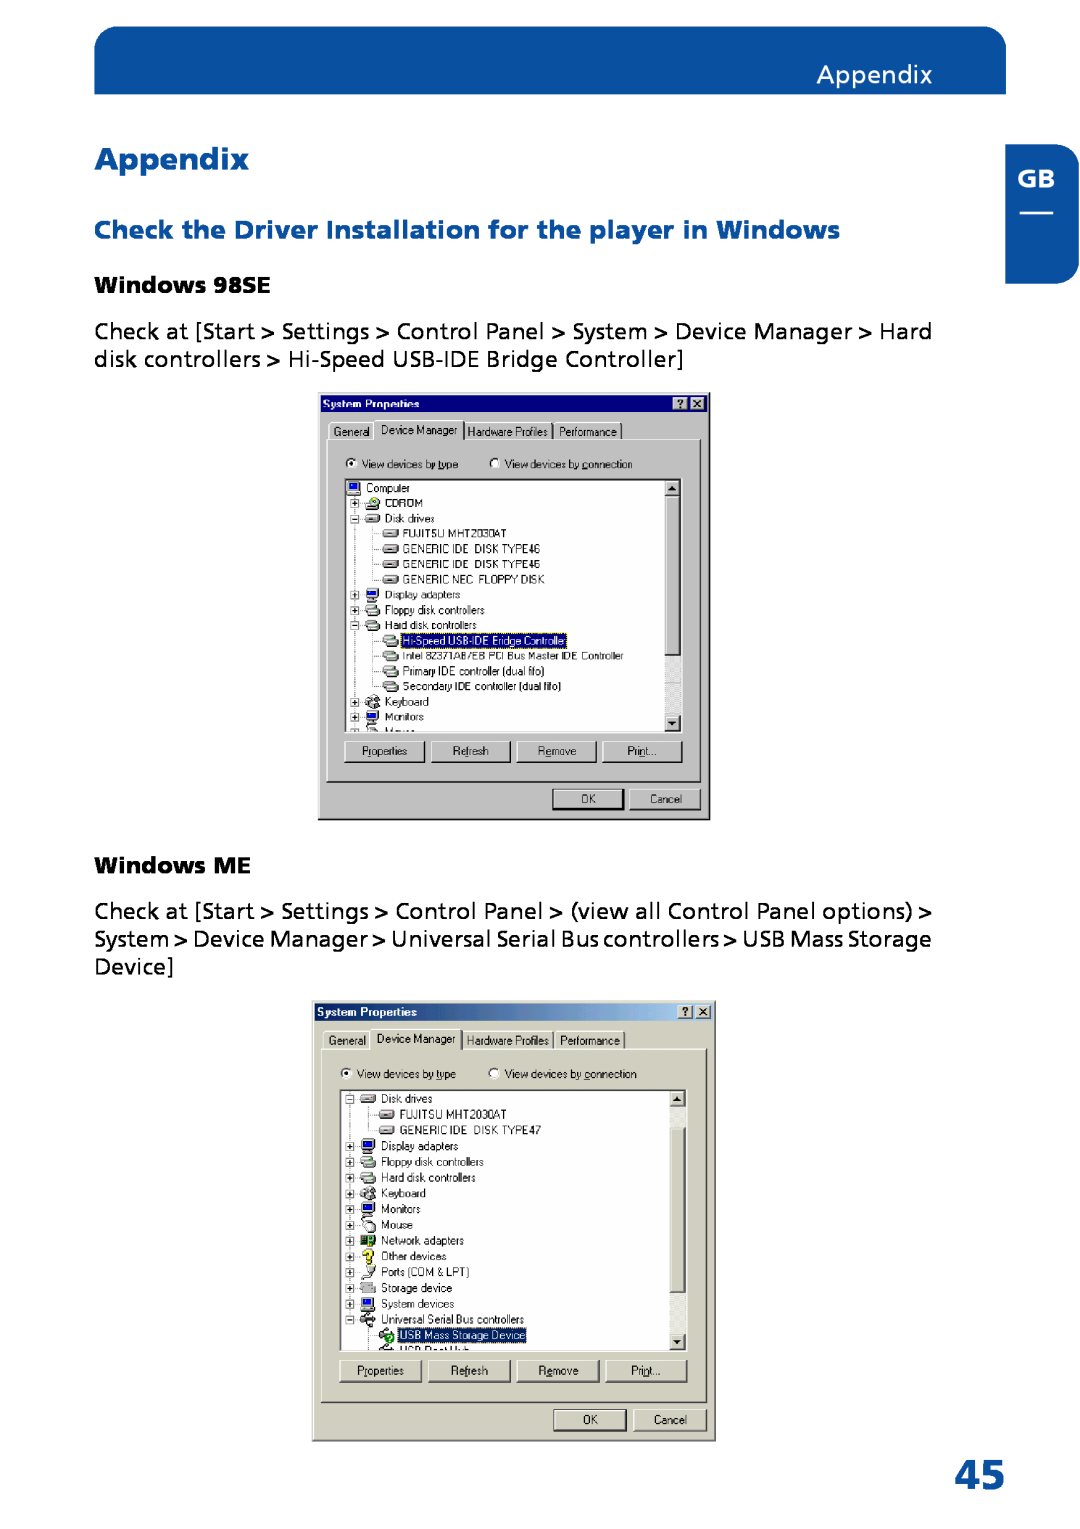 Freecom Technologies Multimedia Player Appendix, Check the Driver Installation for the player in Windows, Windows 98SE 